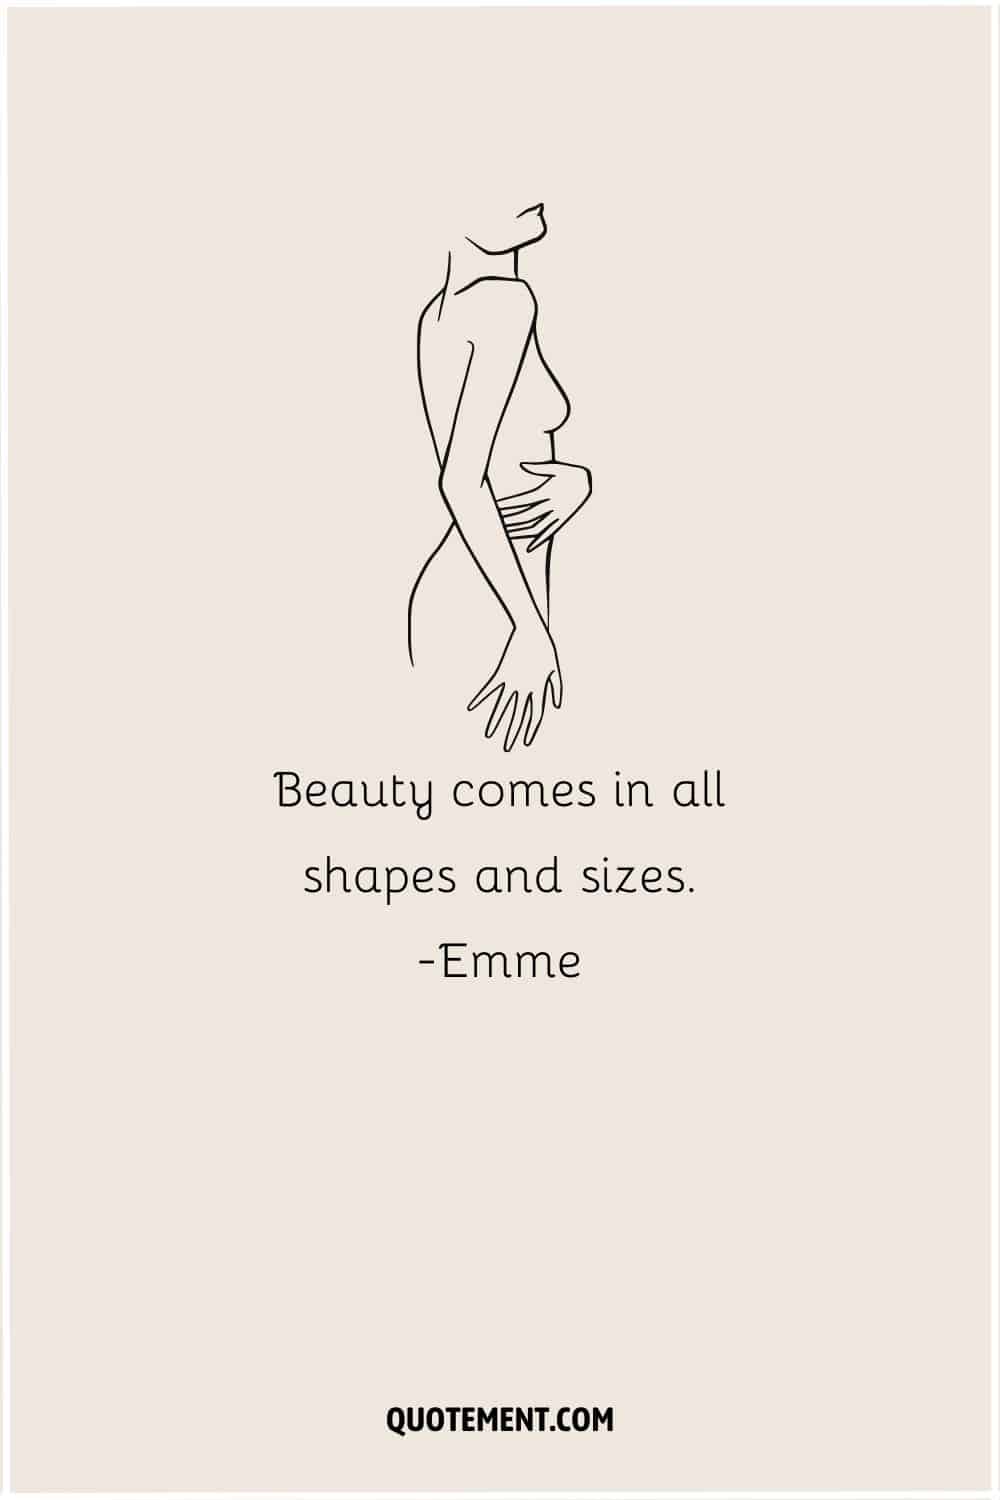 Most powerful body positivity quote and illustration of a woman.
